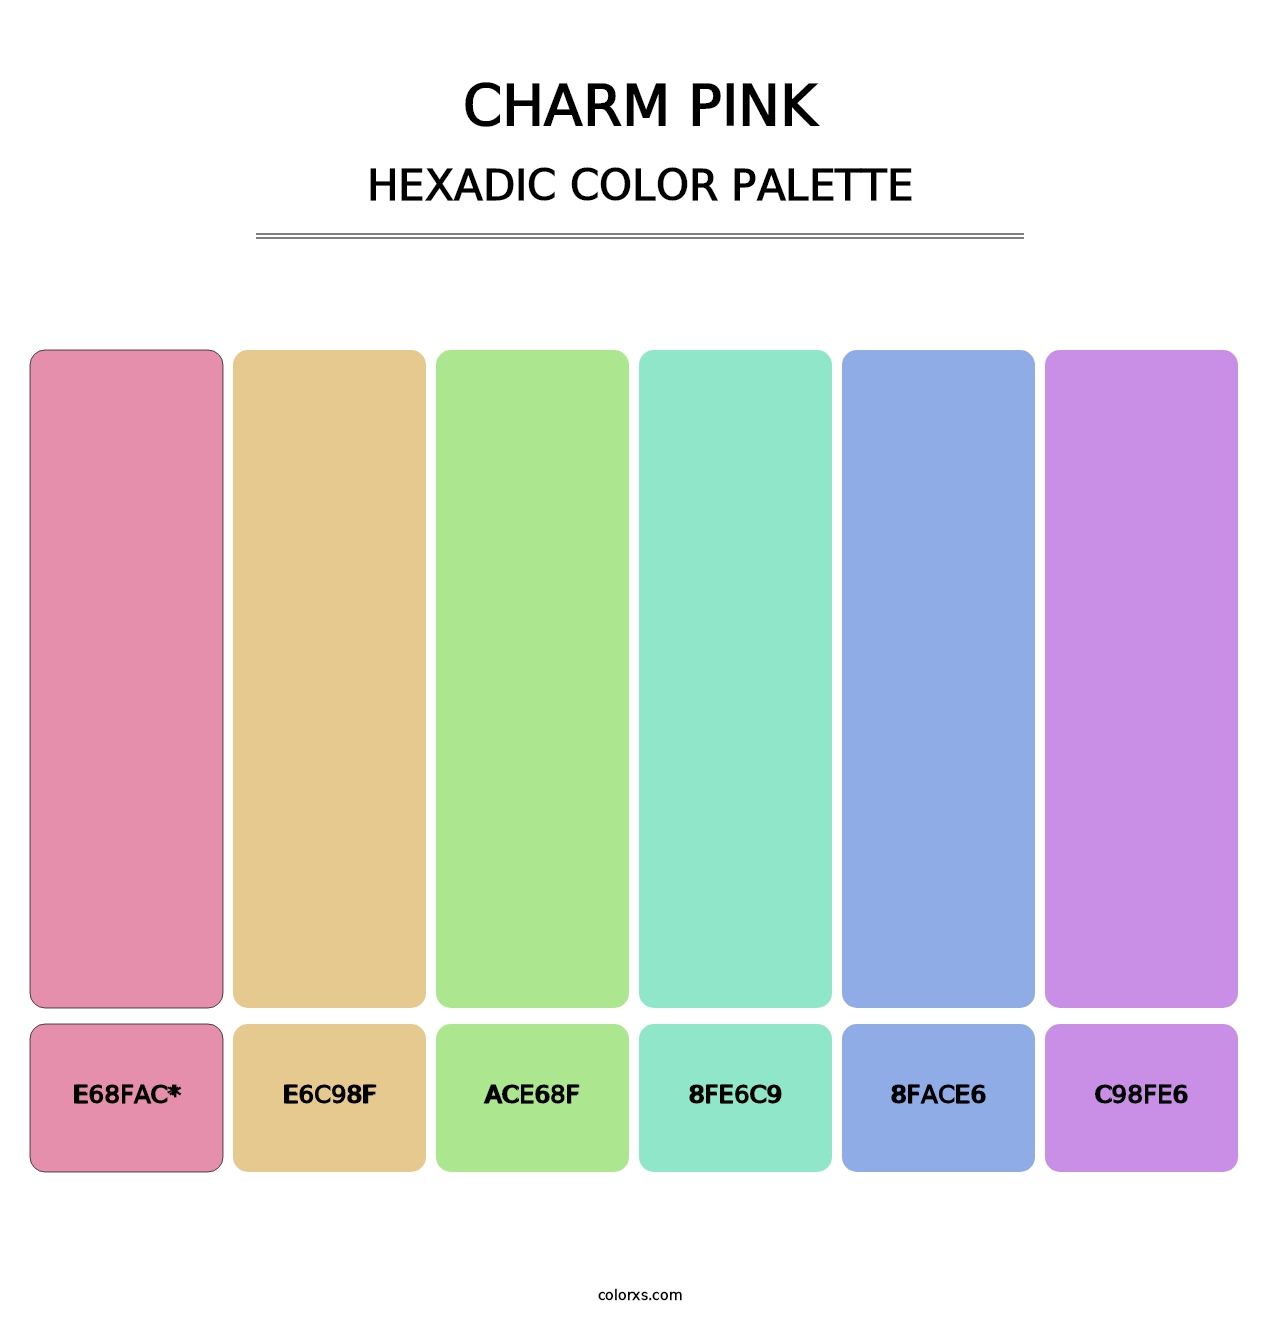 Charm Pink - Hexadic Color Palette